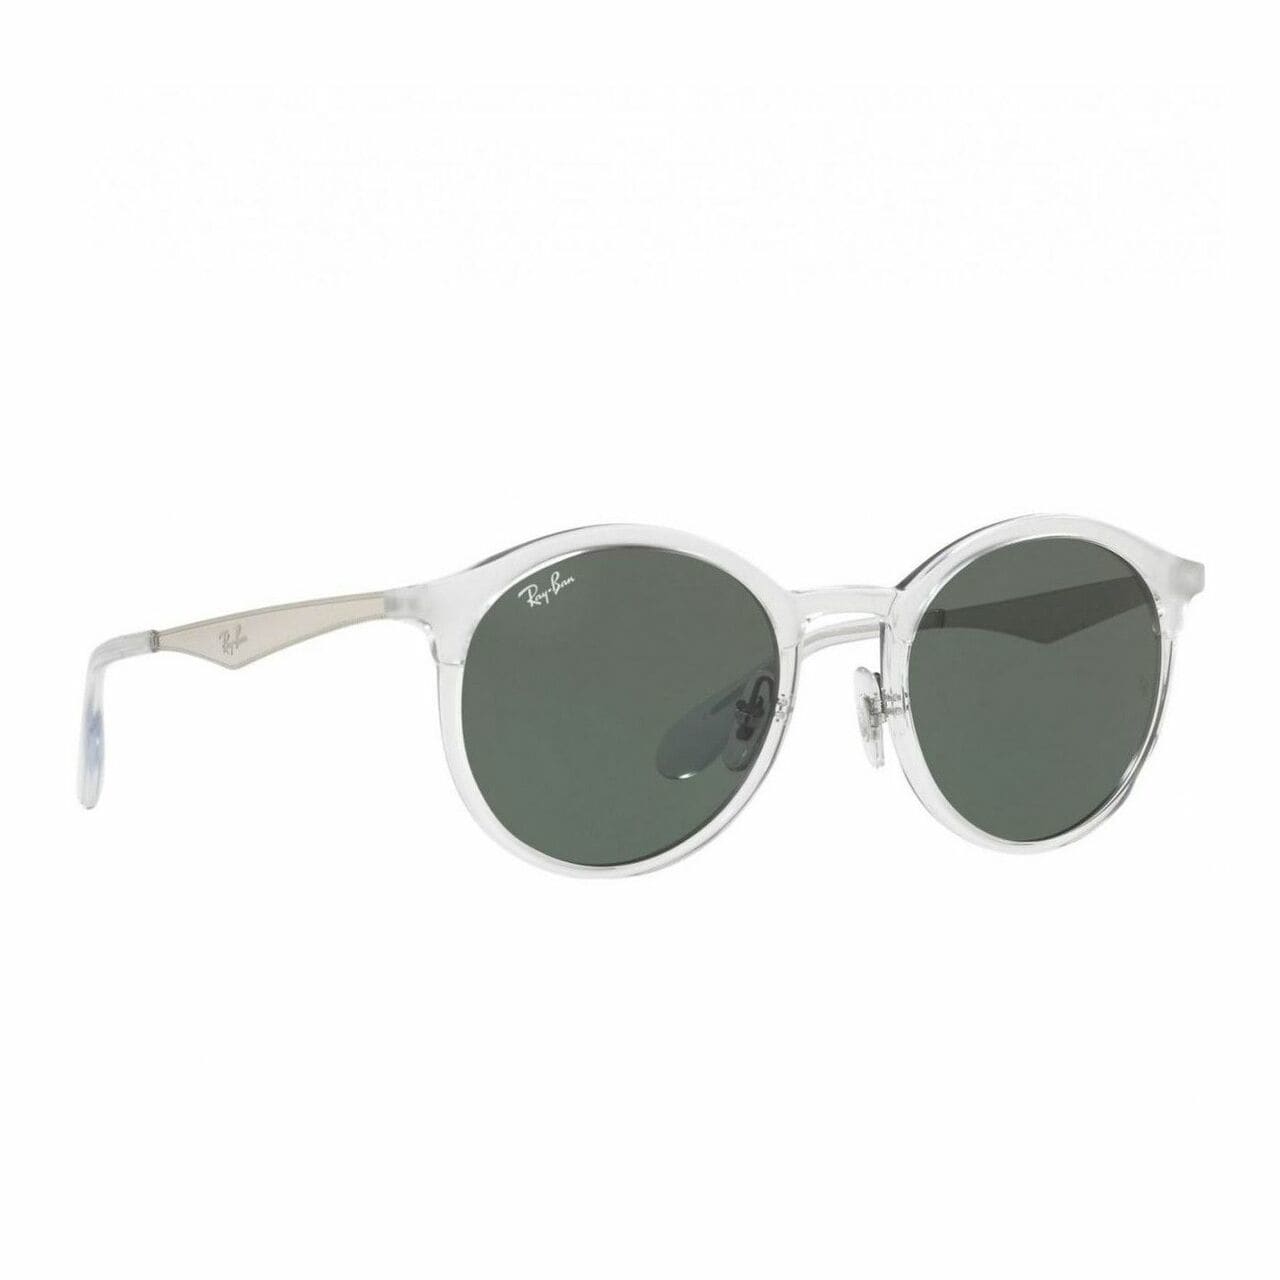 Ray-Ban RB4277-632371 Transparent Silver Round Green Classic Lens Sunglasses 8053672828344